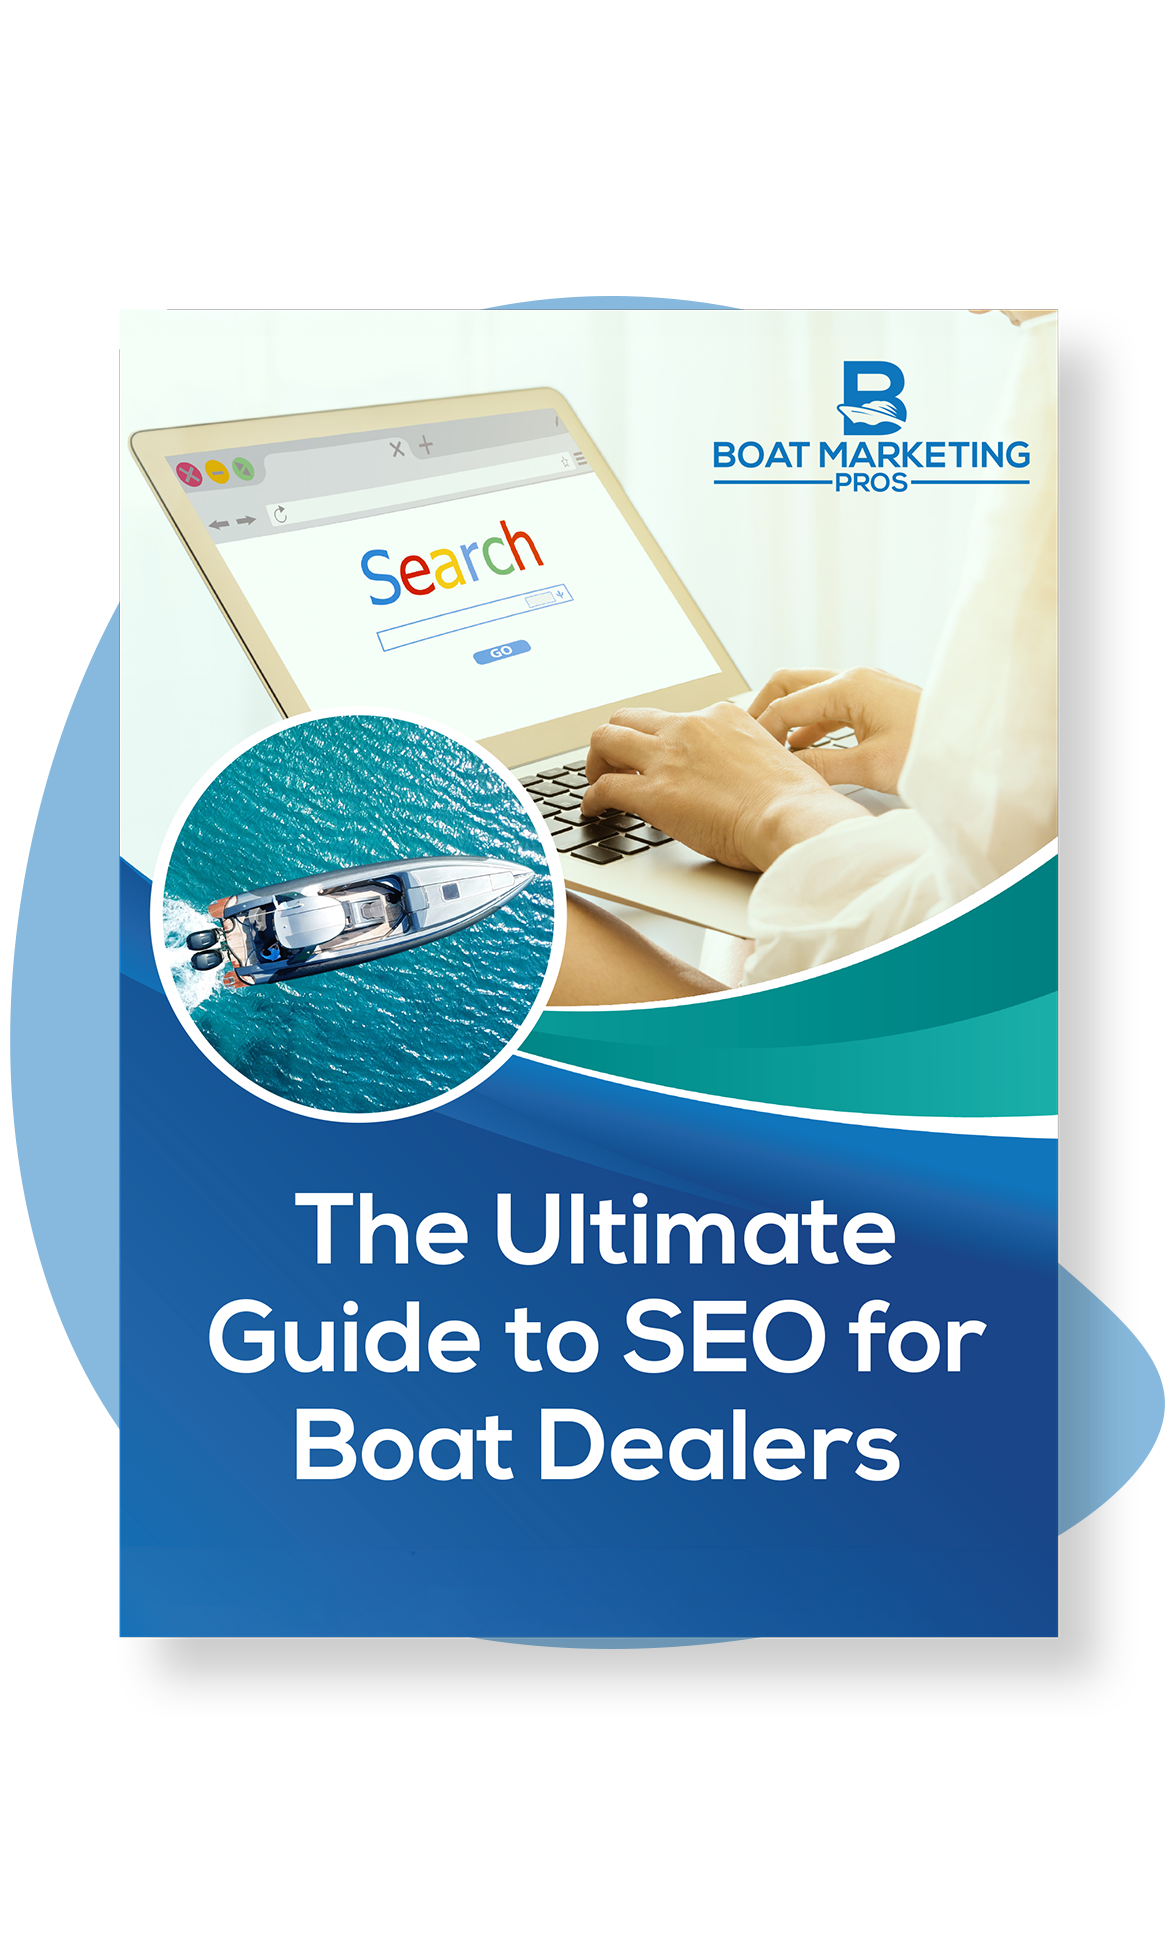 The Ultimate Guide to SEO for Boat Dealers